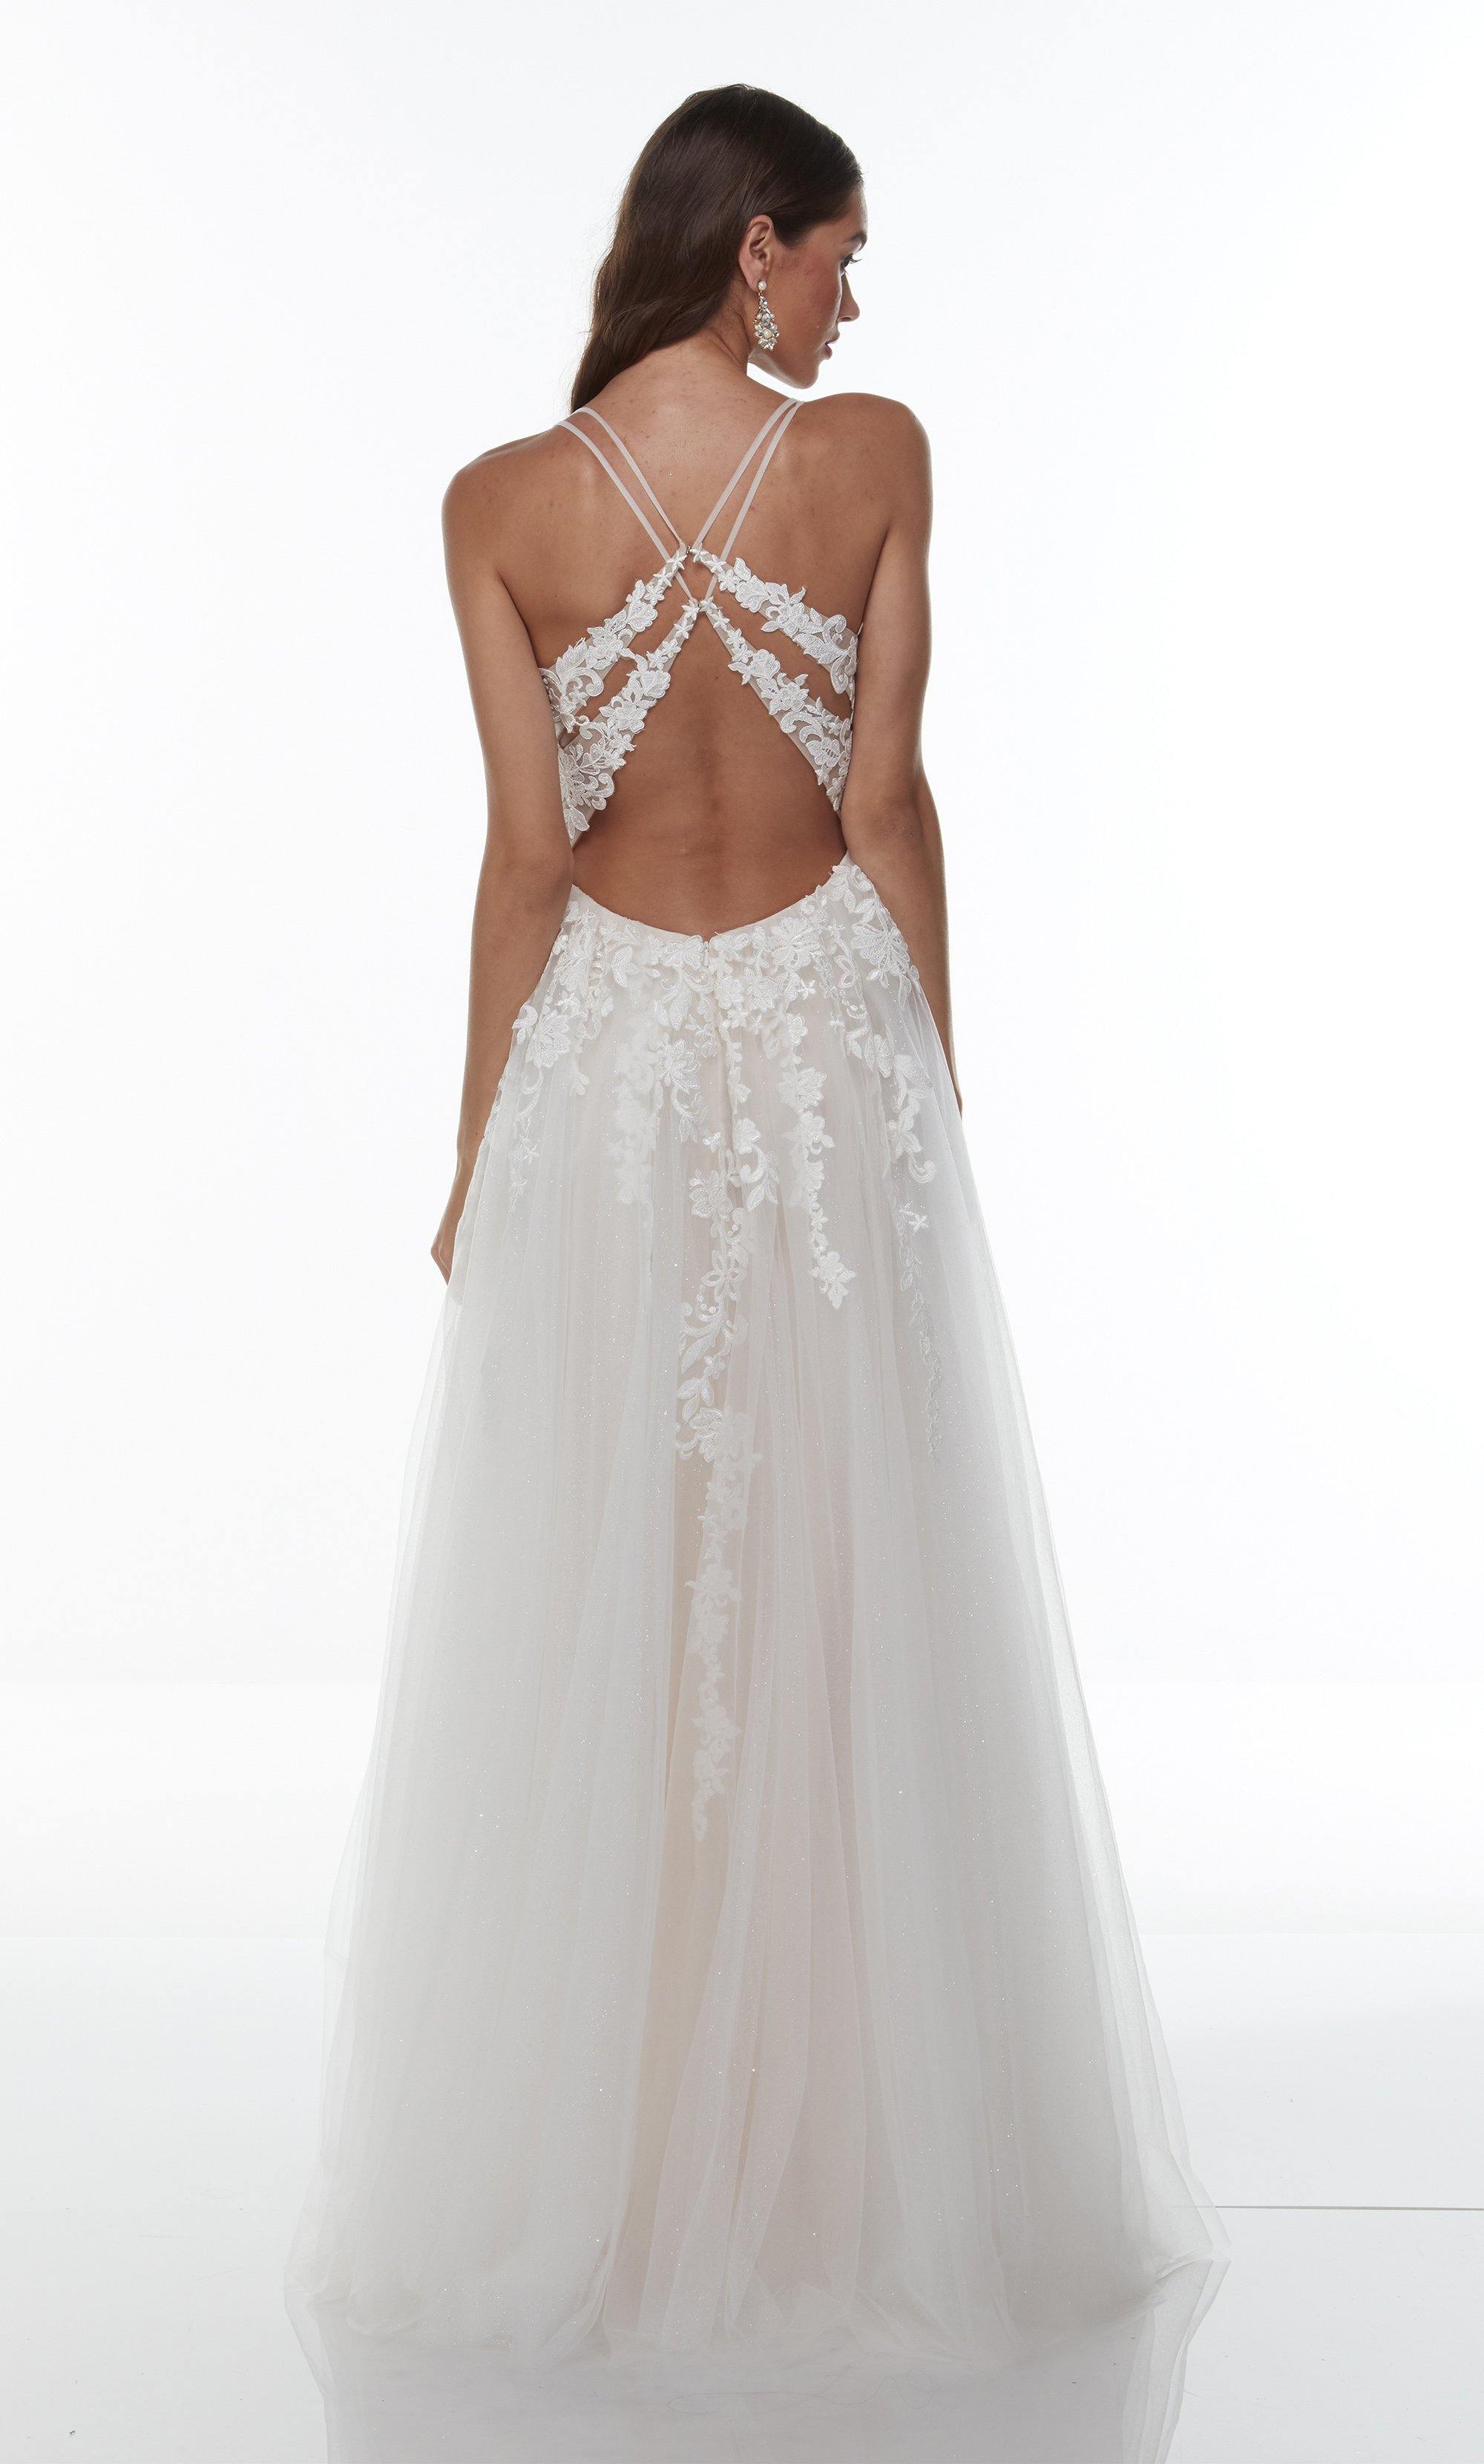 Formal Dress: 61110. Long Sexy White Dress, Plunging Neckline, High-low